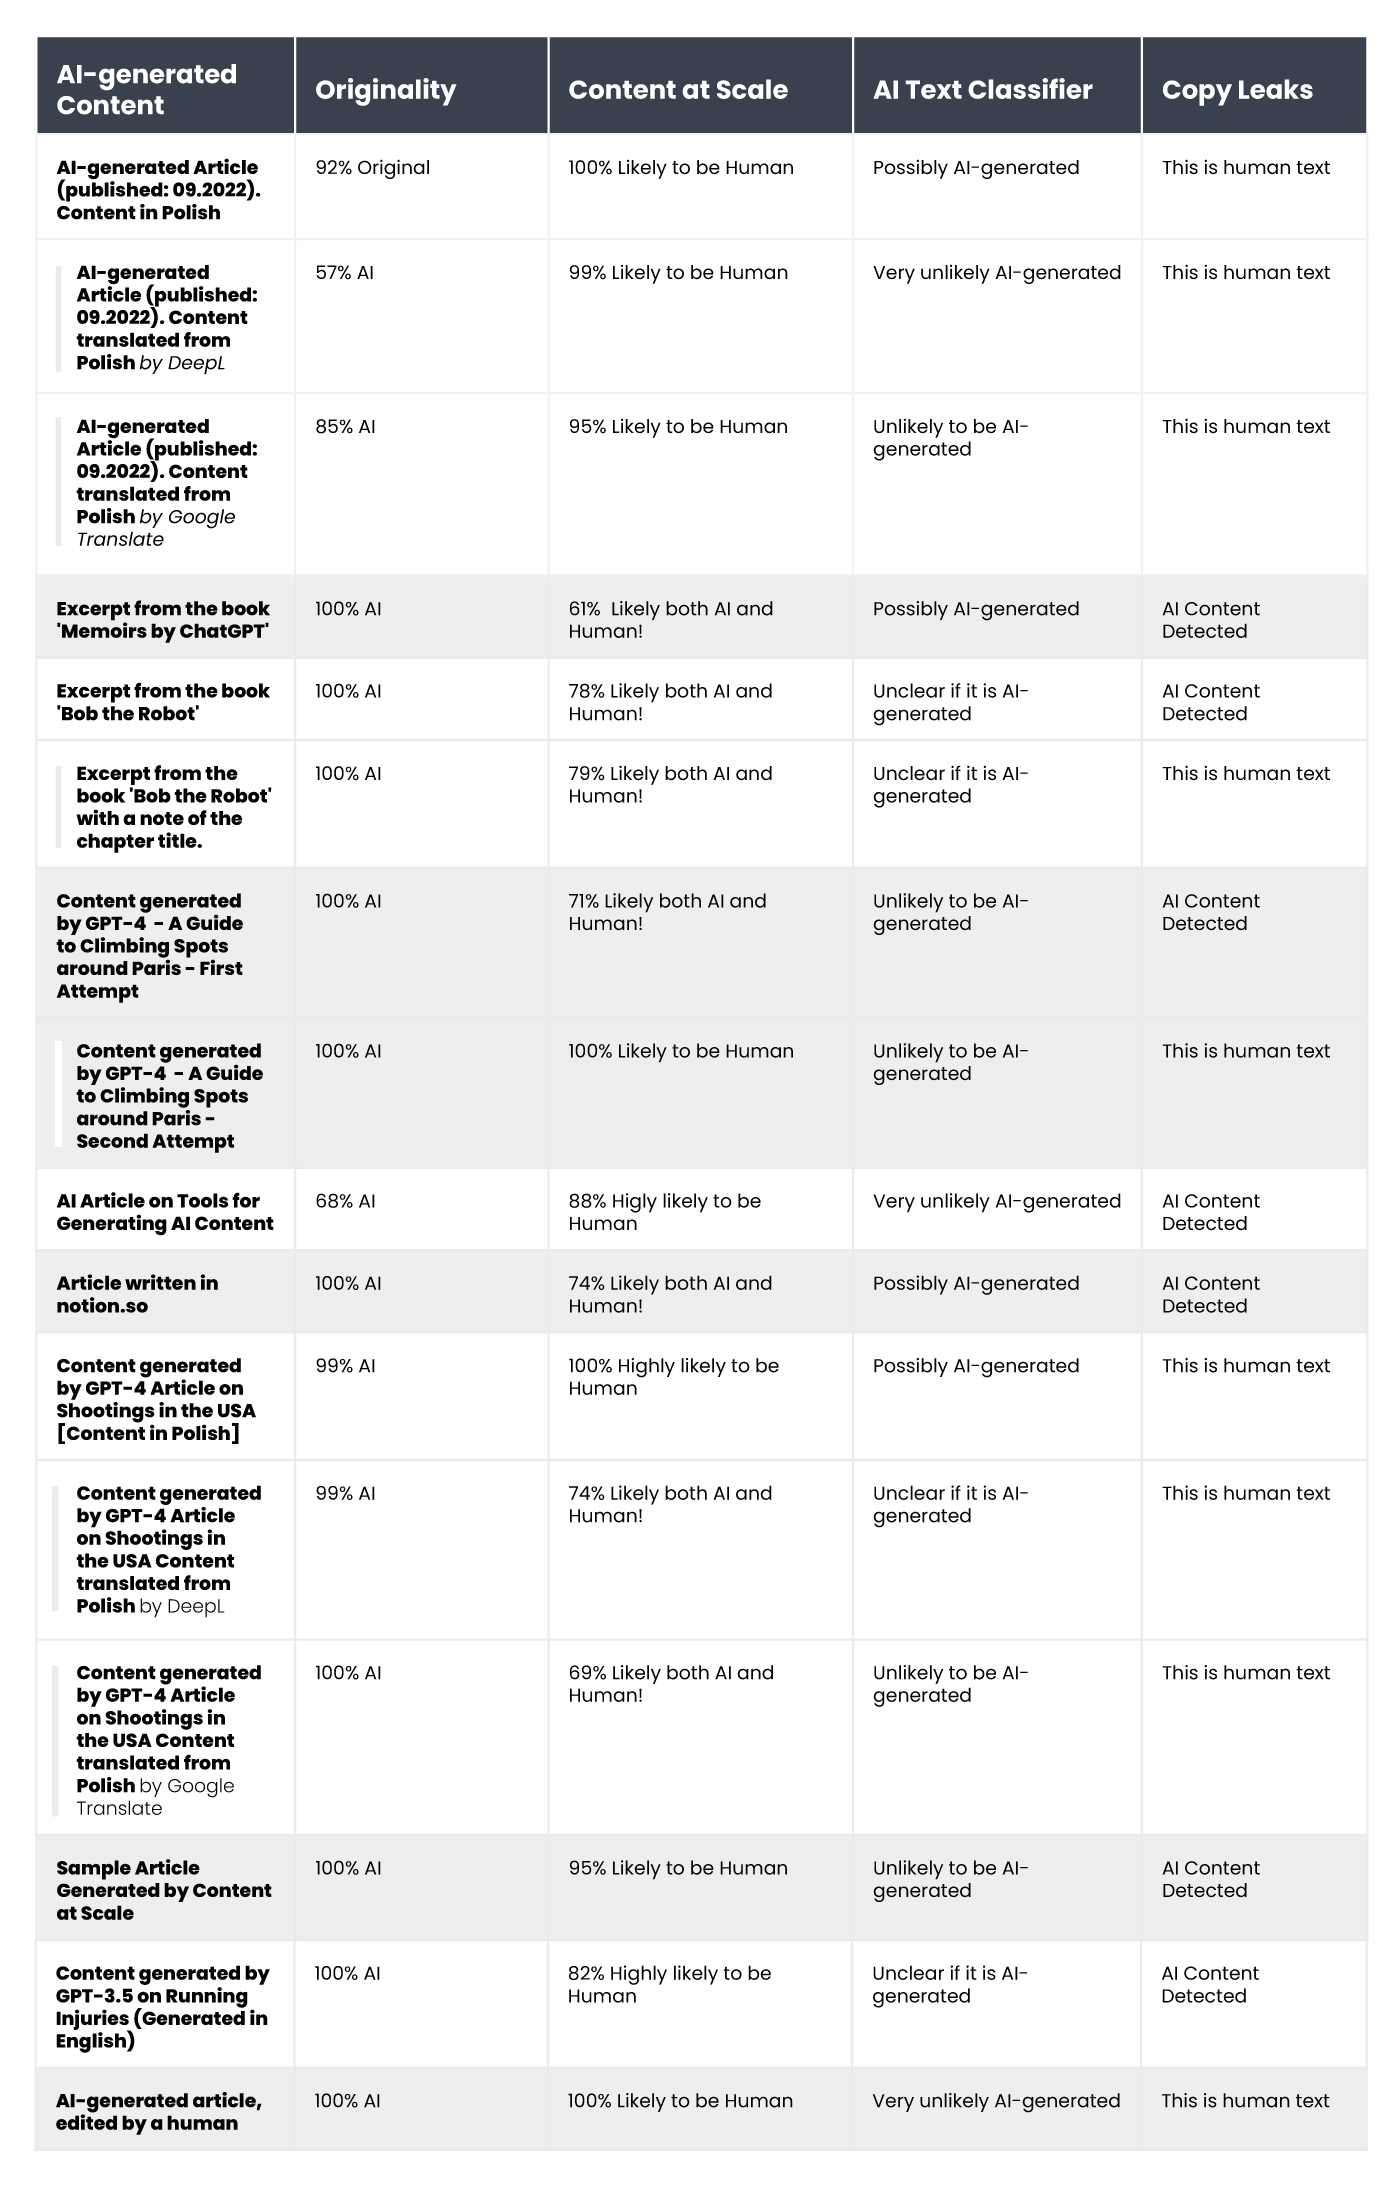 A table showing the results of content verification for AI-generated content using AI content detectors